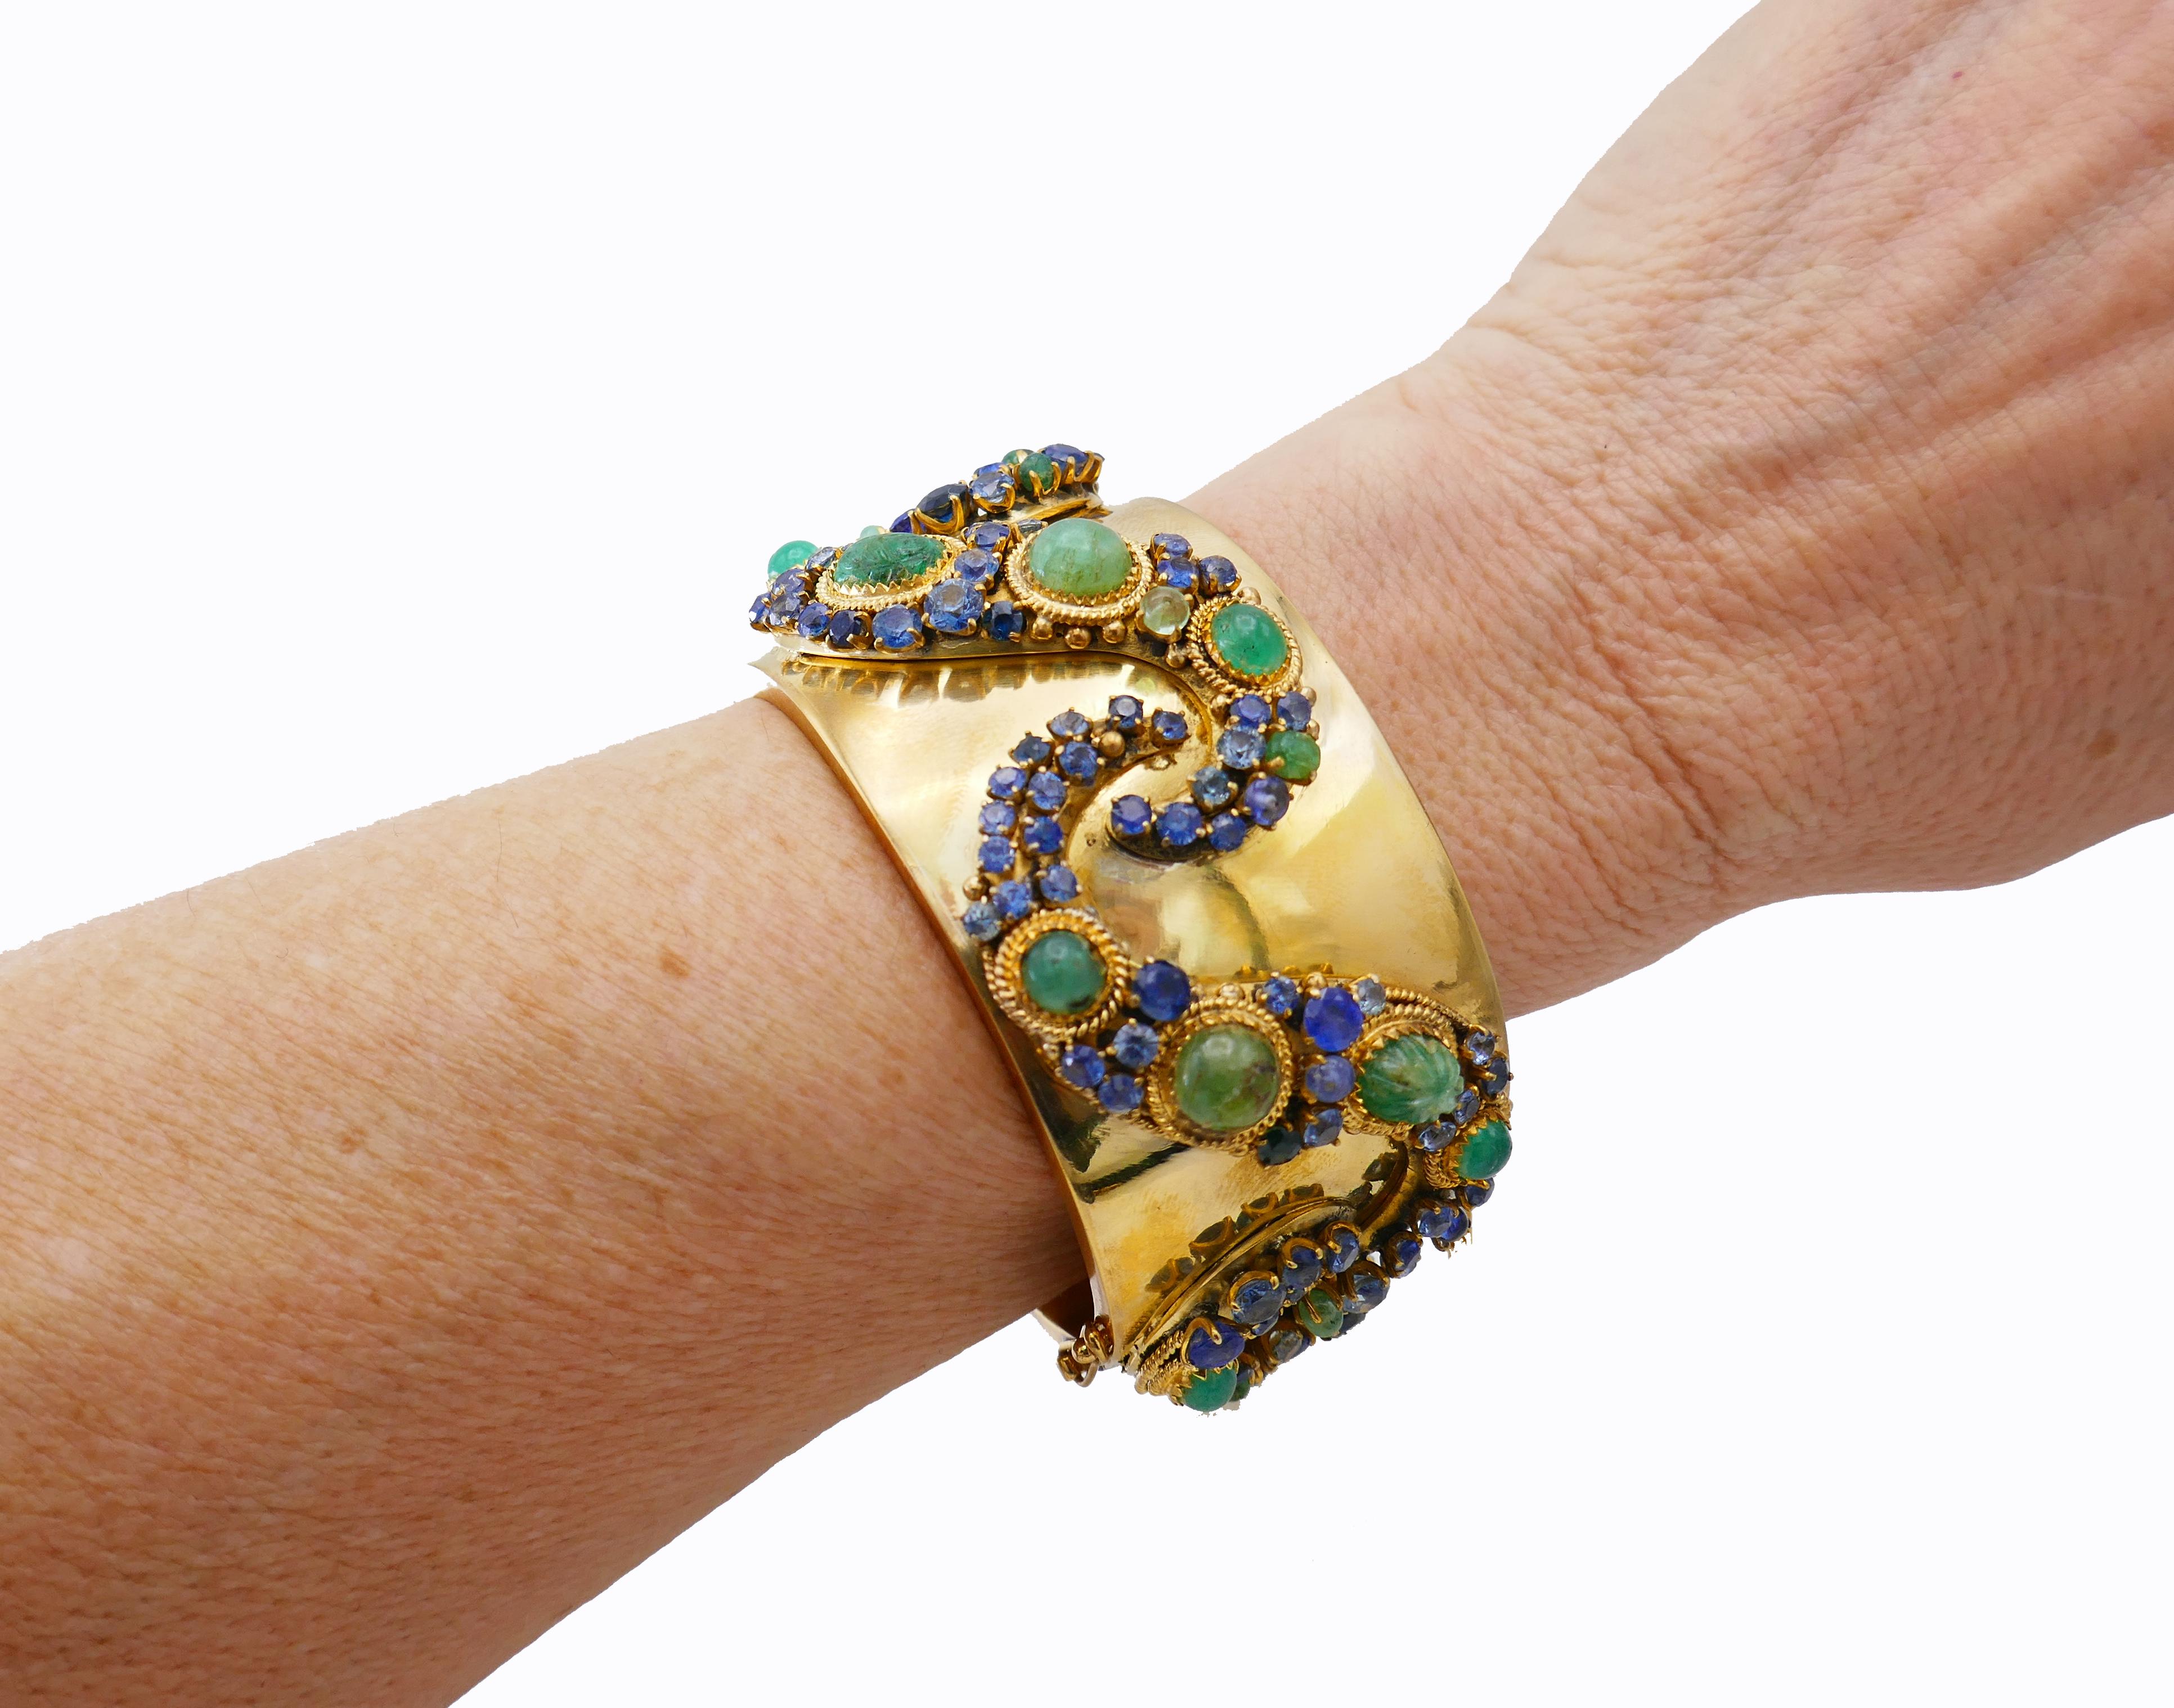 Chic vintage bangle bracelet made of 14 karat yellow gold, cabochon, beaded and faceted emeralds and sapphires.
Measurement:  1 7/16” x 6 ½” (3.5 x 16 cm). Fits up to 6 ¼-inch (16-cm) wrist. 
Weight: 174.4 grams. 
Colorful and wearable, the bangle